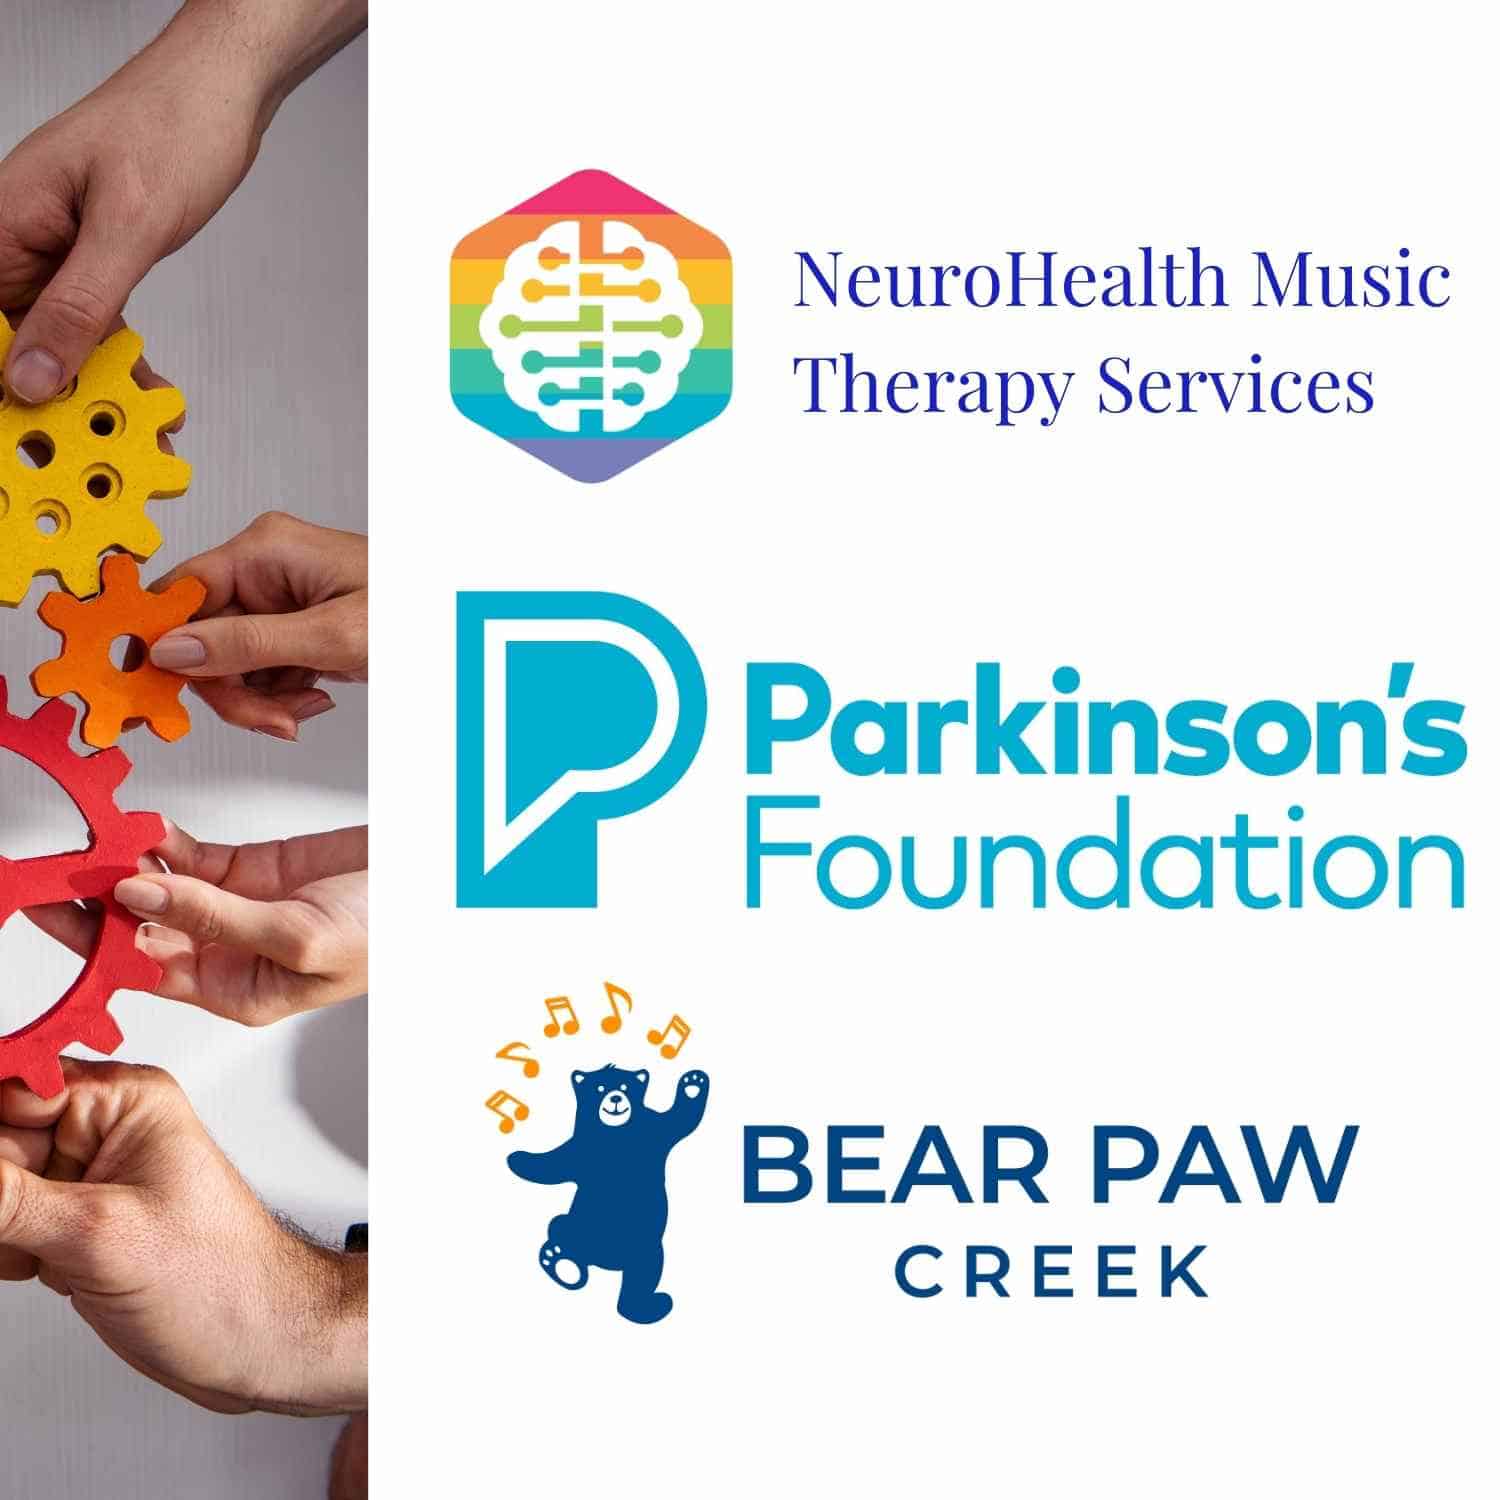 NeuroHealth Neurological Music Therapy Services Motivate Through Music Program for Parkinson's Foundation